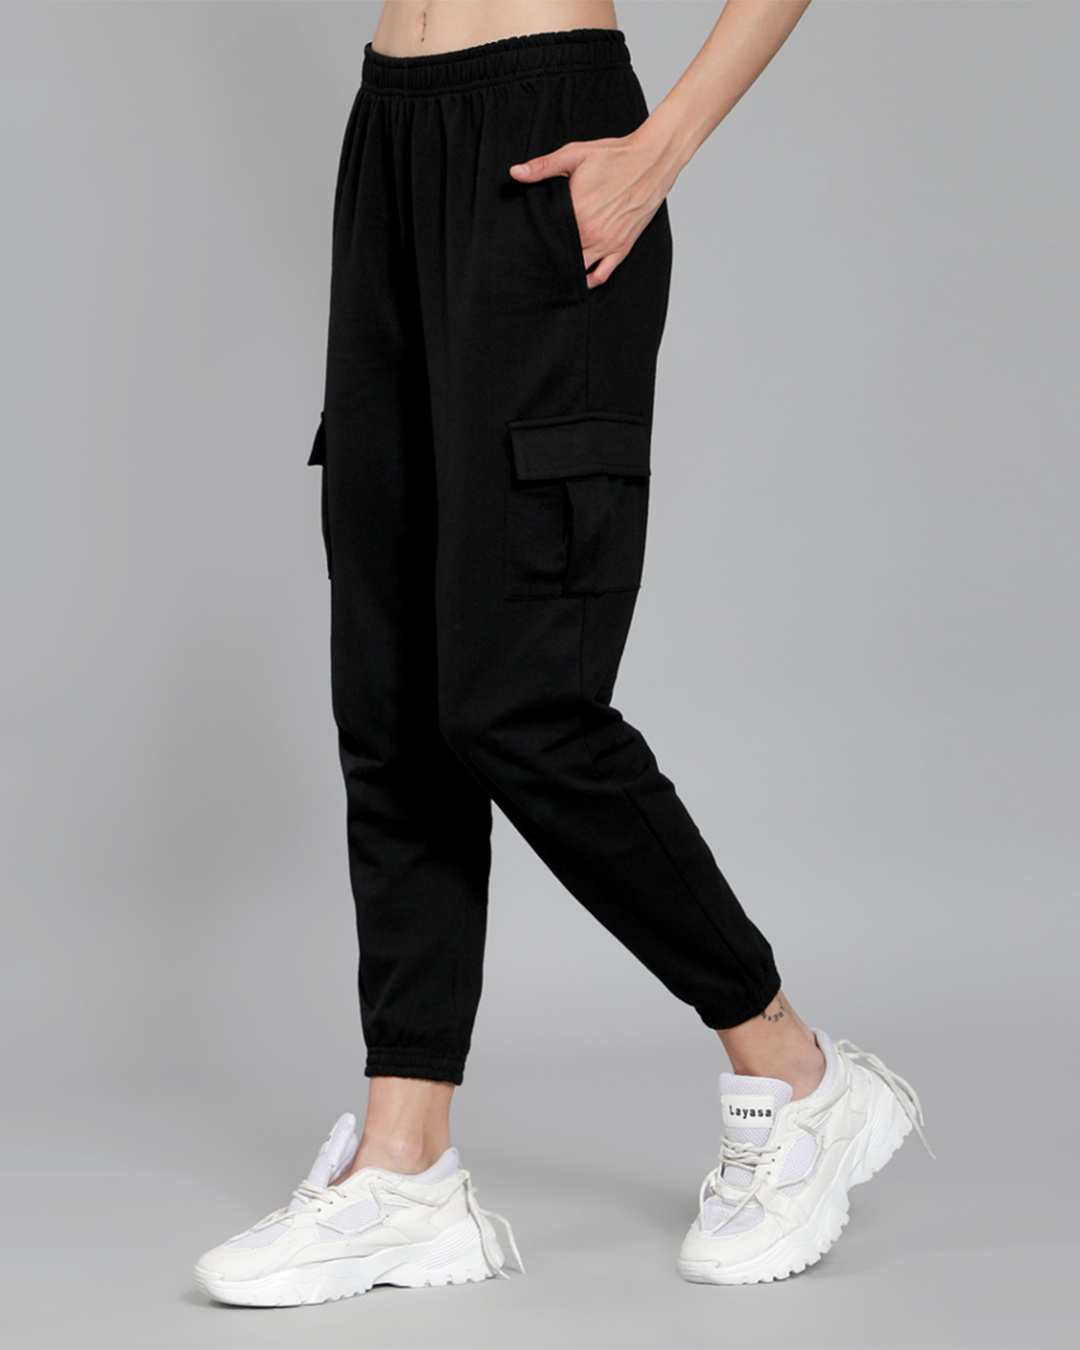 Cargo Joggers Outfit Ideas: How To Dress Up Or Down With Cargo Joggers